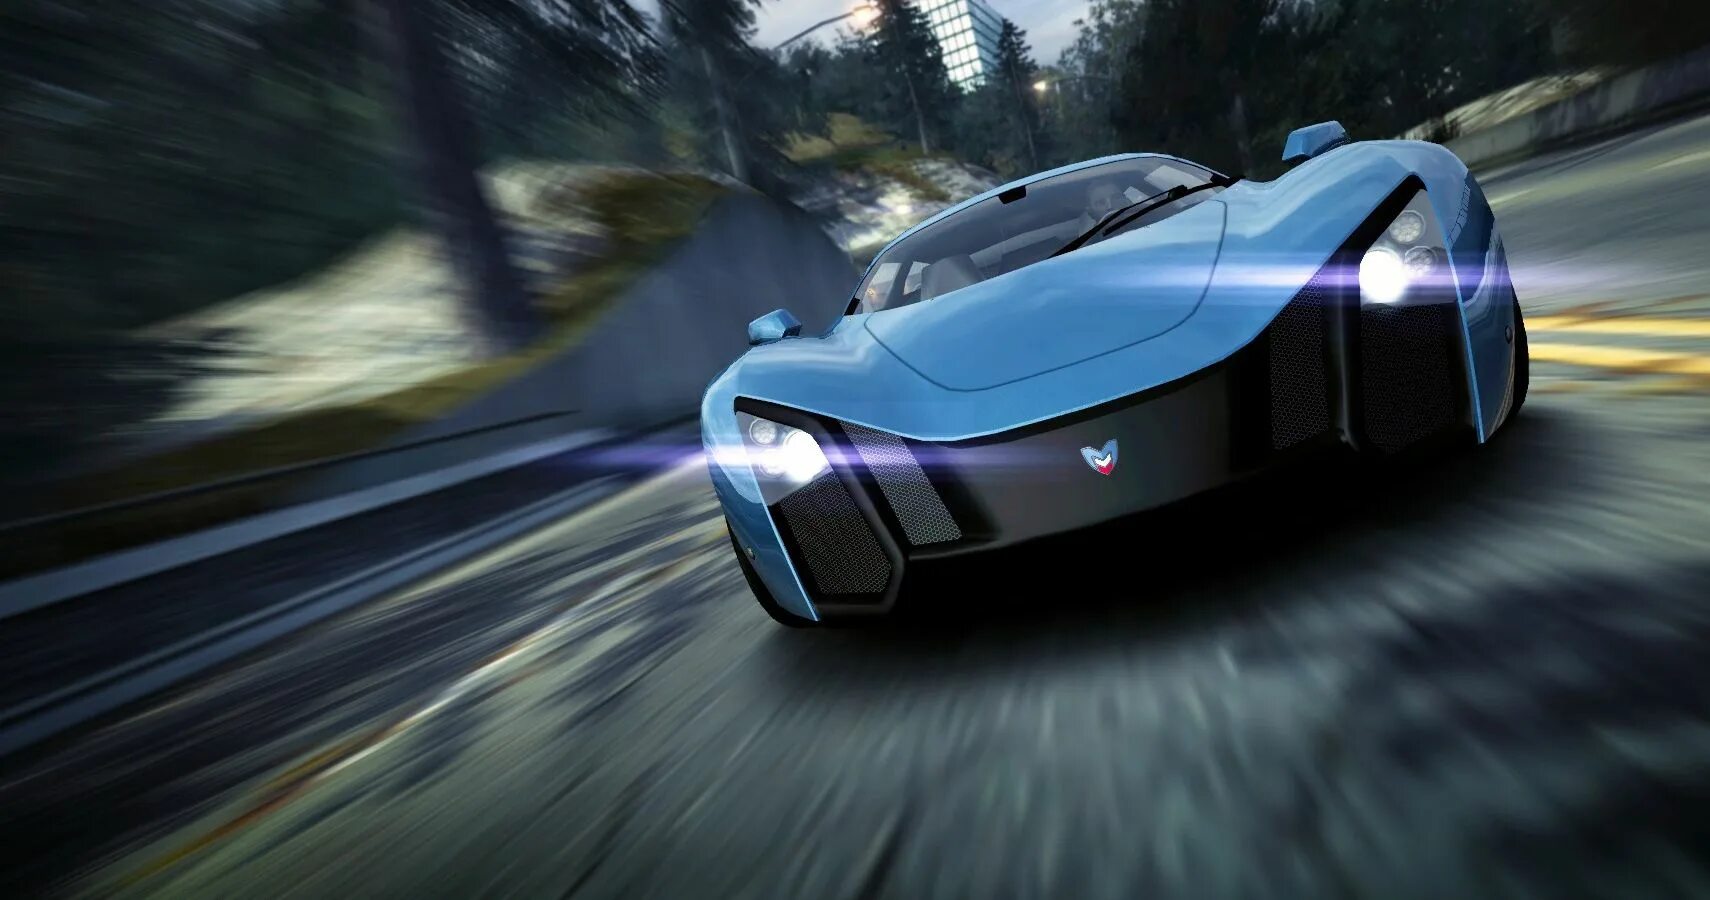 Need for Speed World Marussia. Need for Speed World Marussia b2. NFS Rivals Marussia b2 Police. Marussia b2 NFS World.